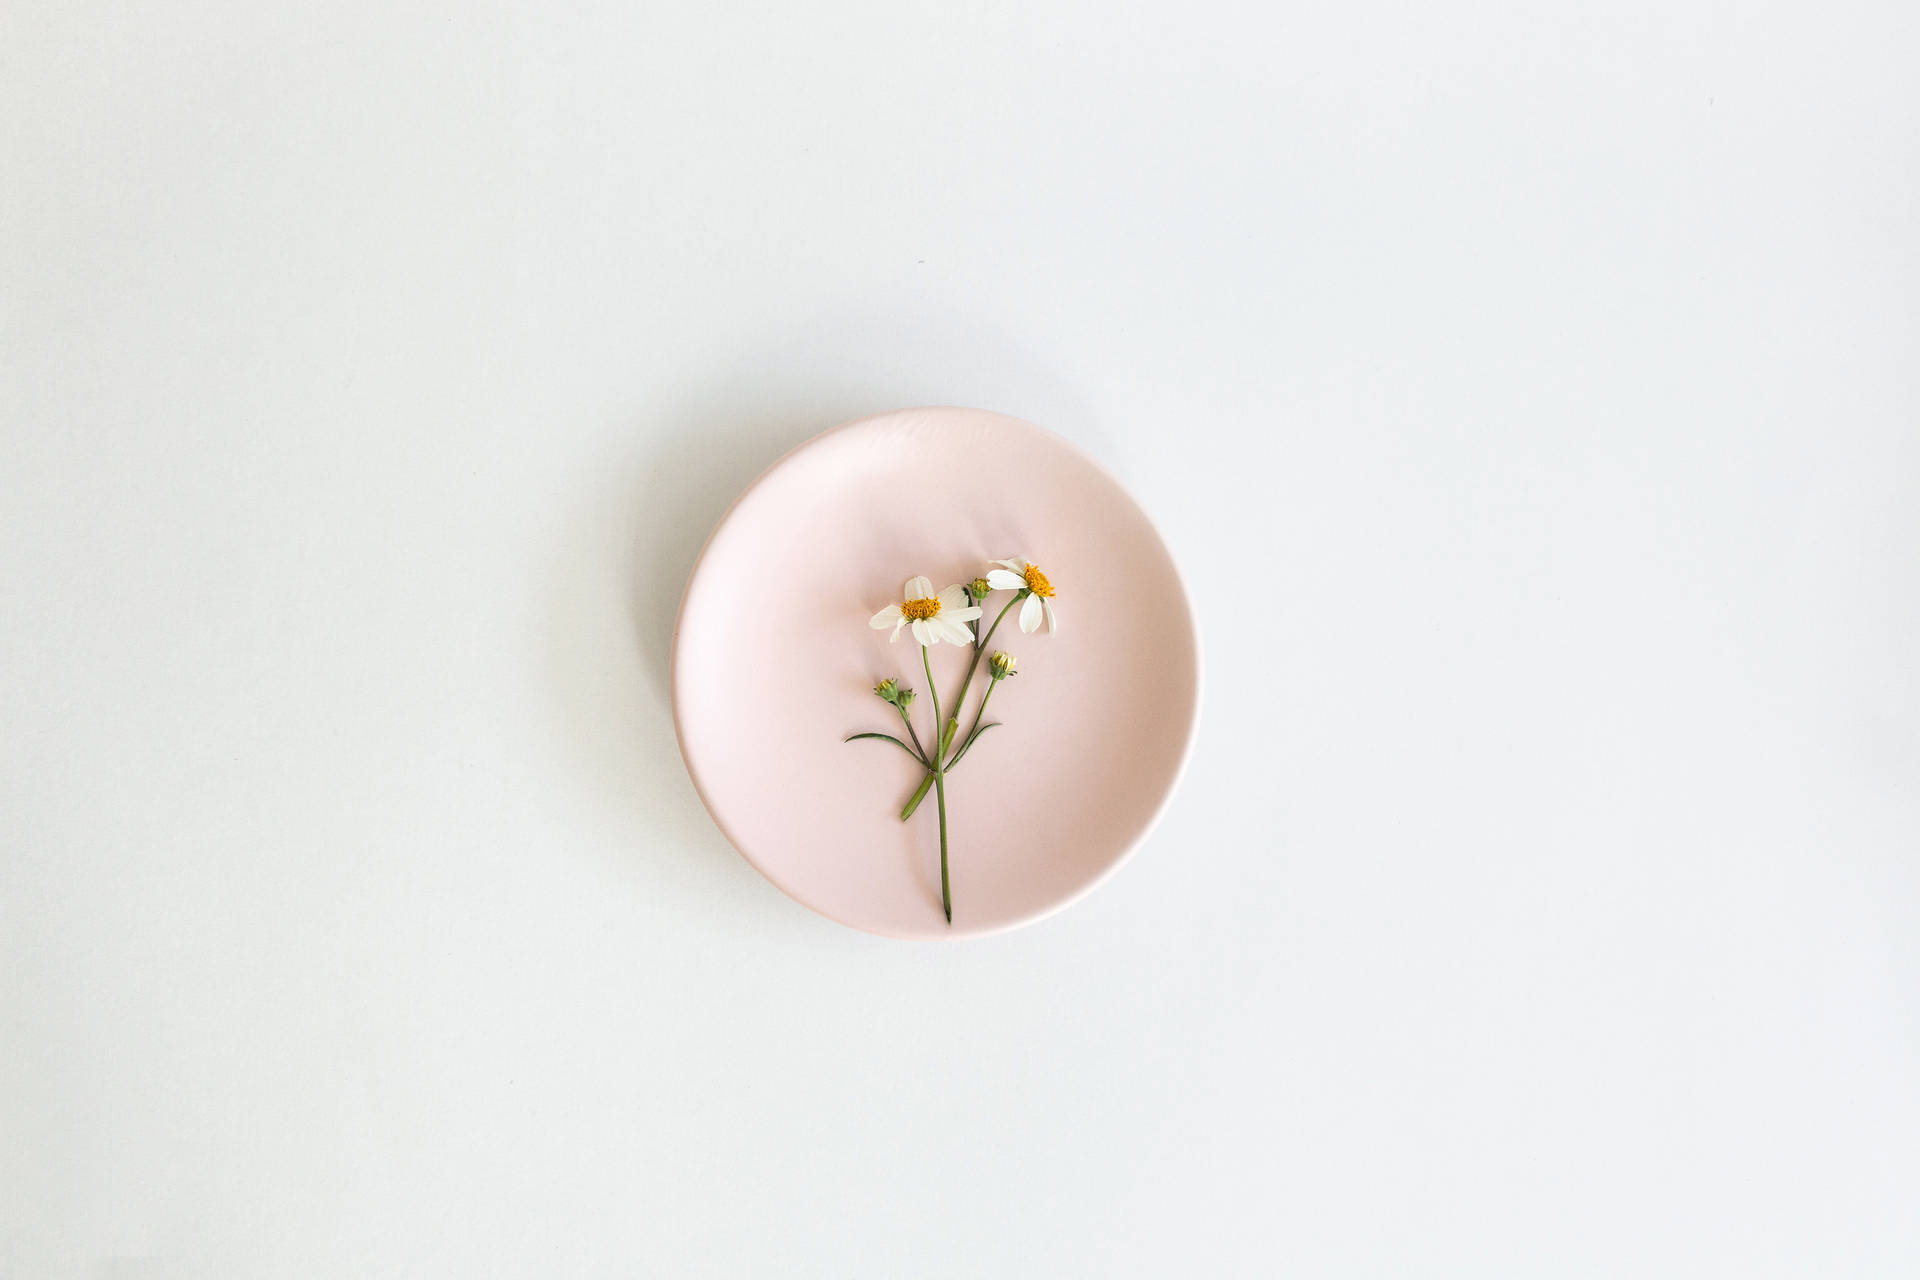 Aesthetic Pink Desktop Plate And Flower